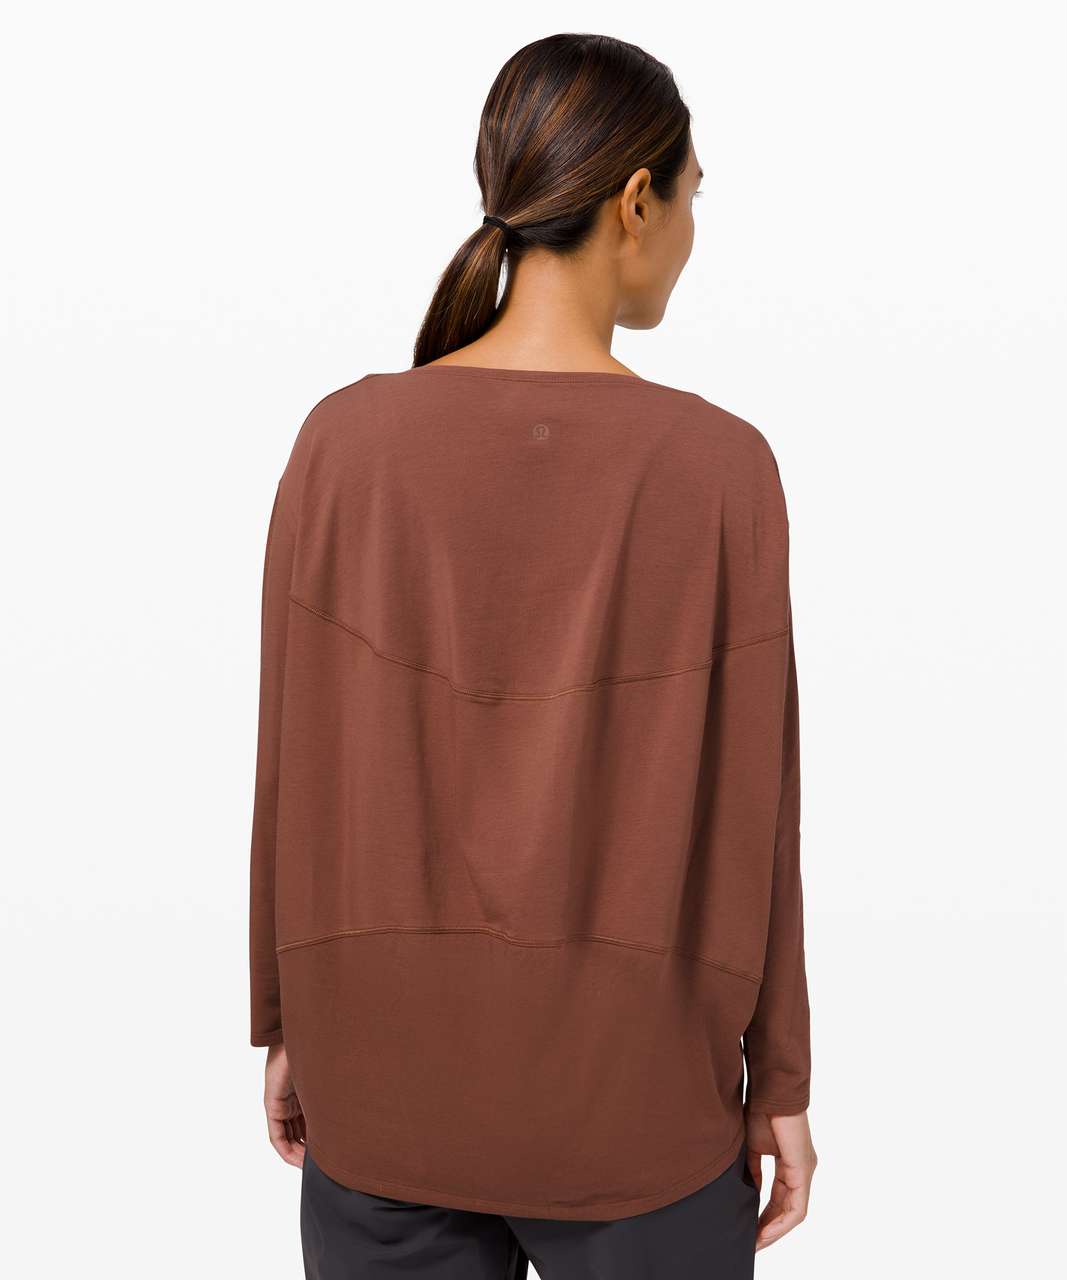 Lululemon Back In Action Long Sleeve - Ancient Copper